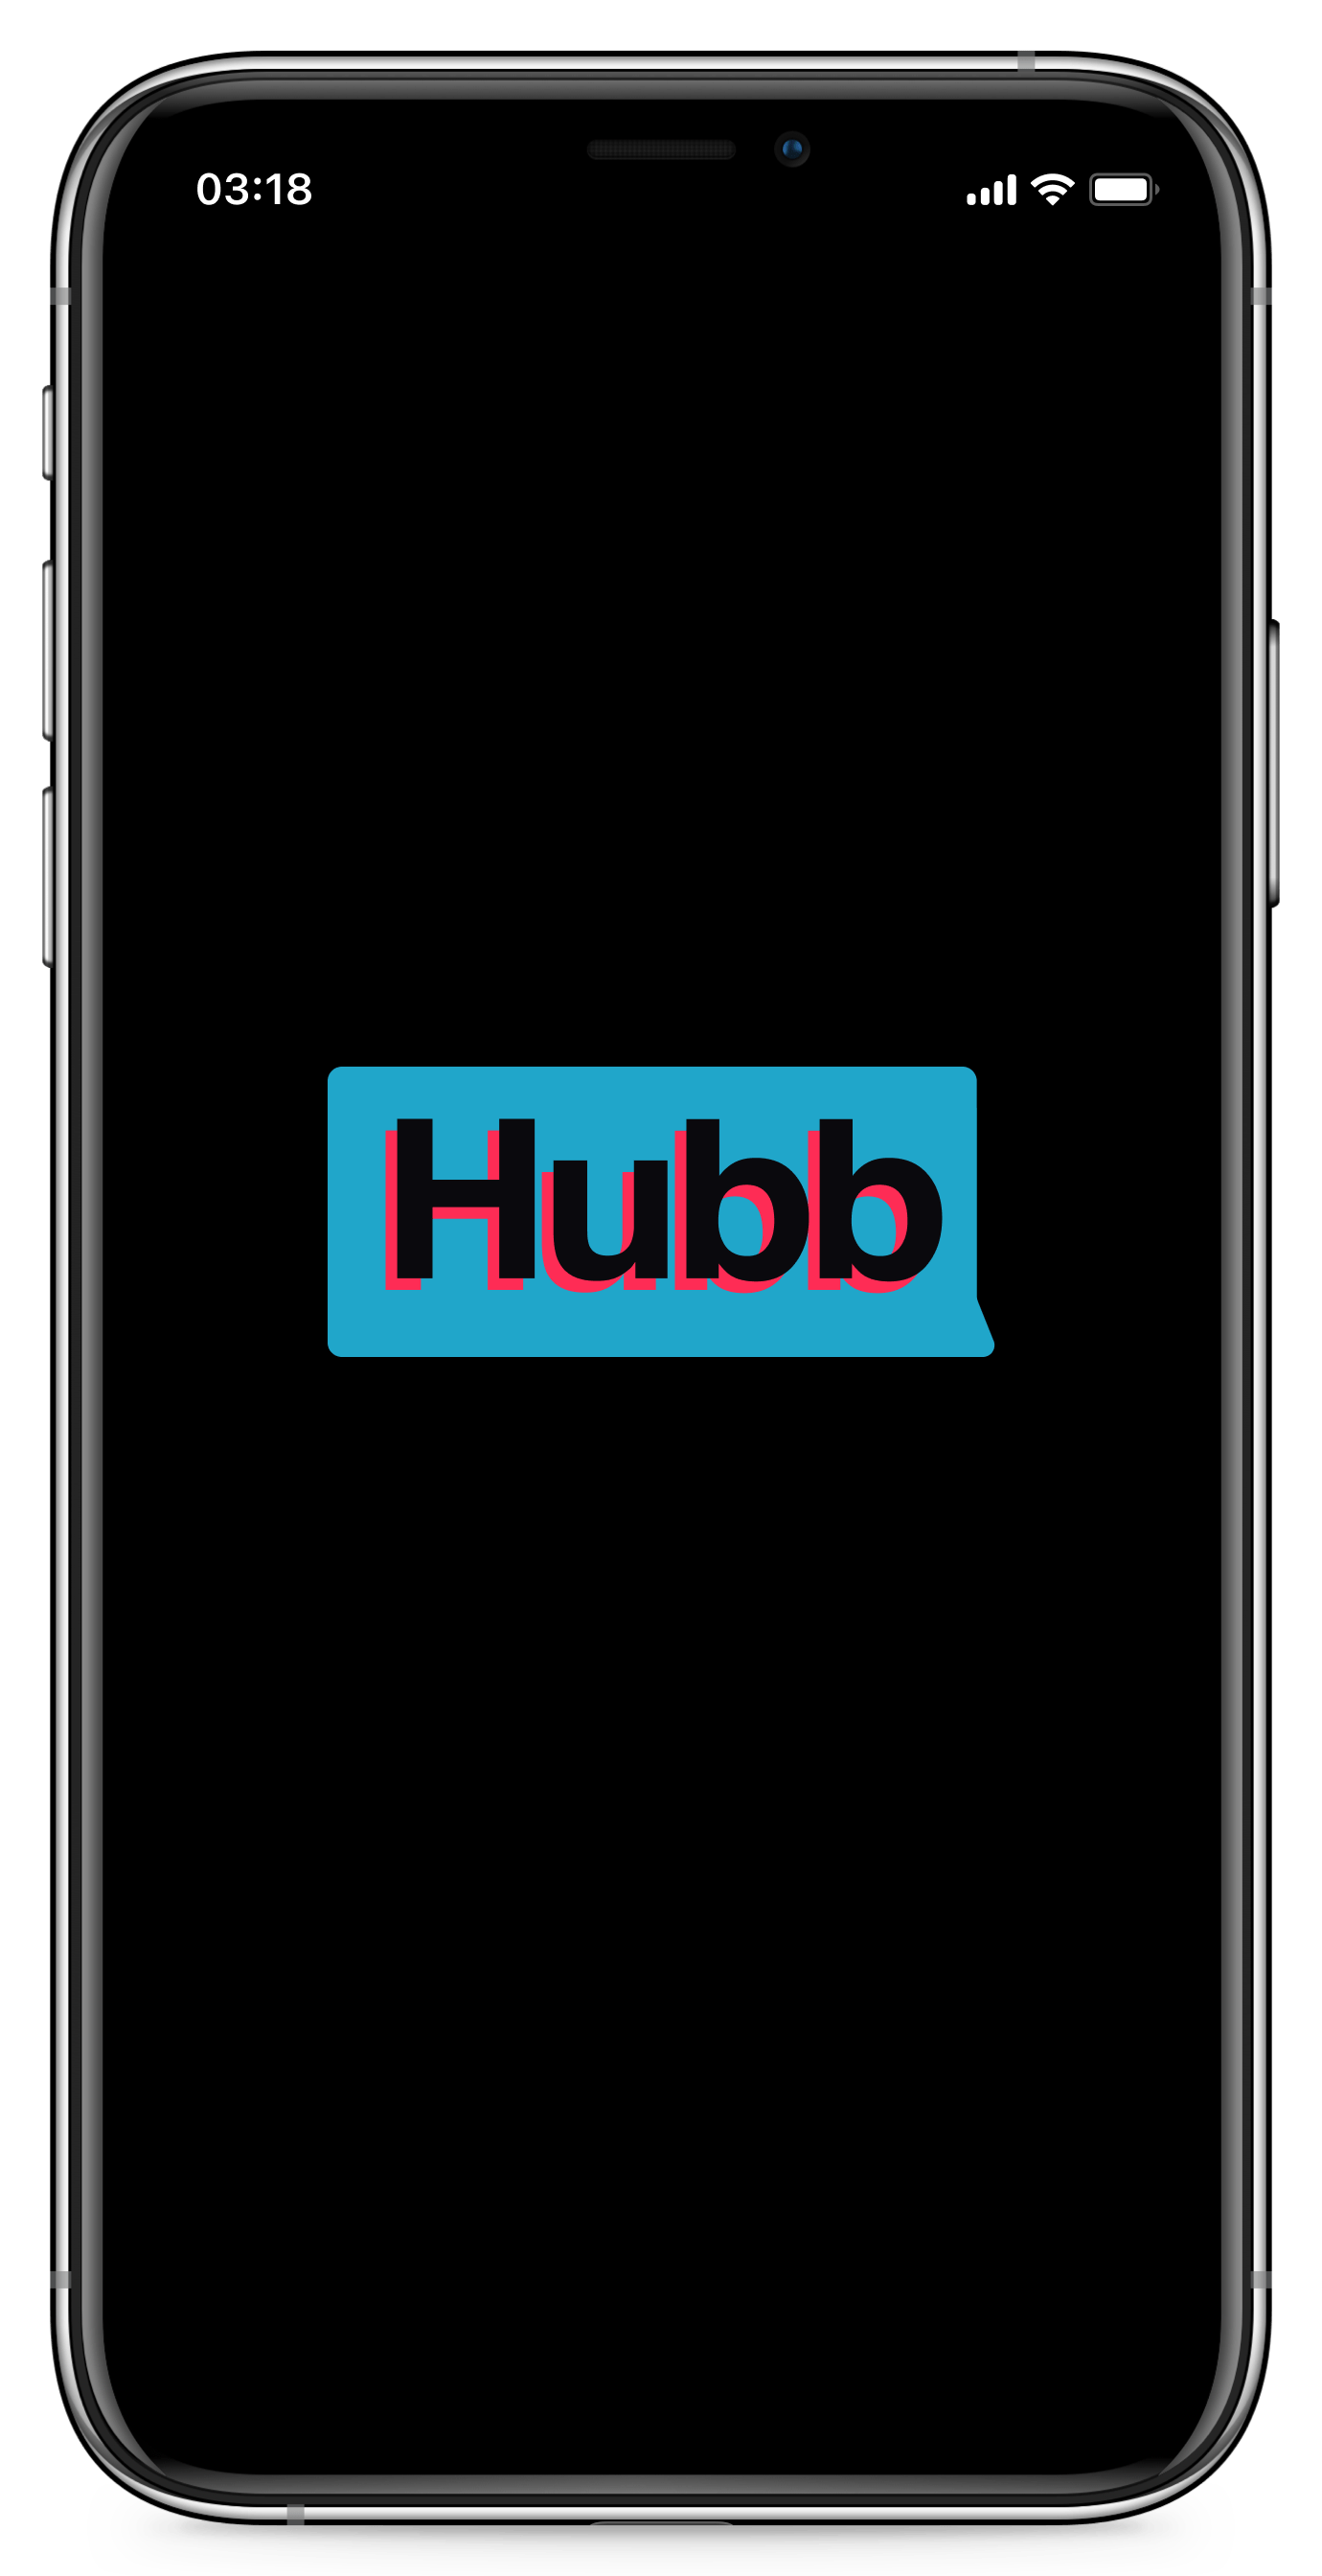 Discover with Hubb